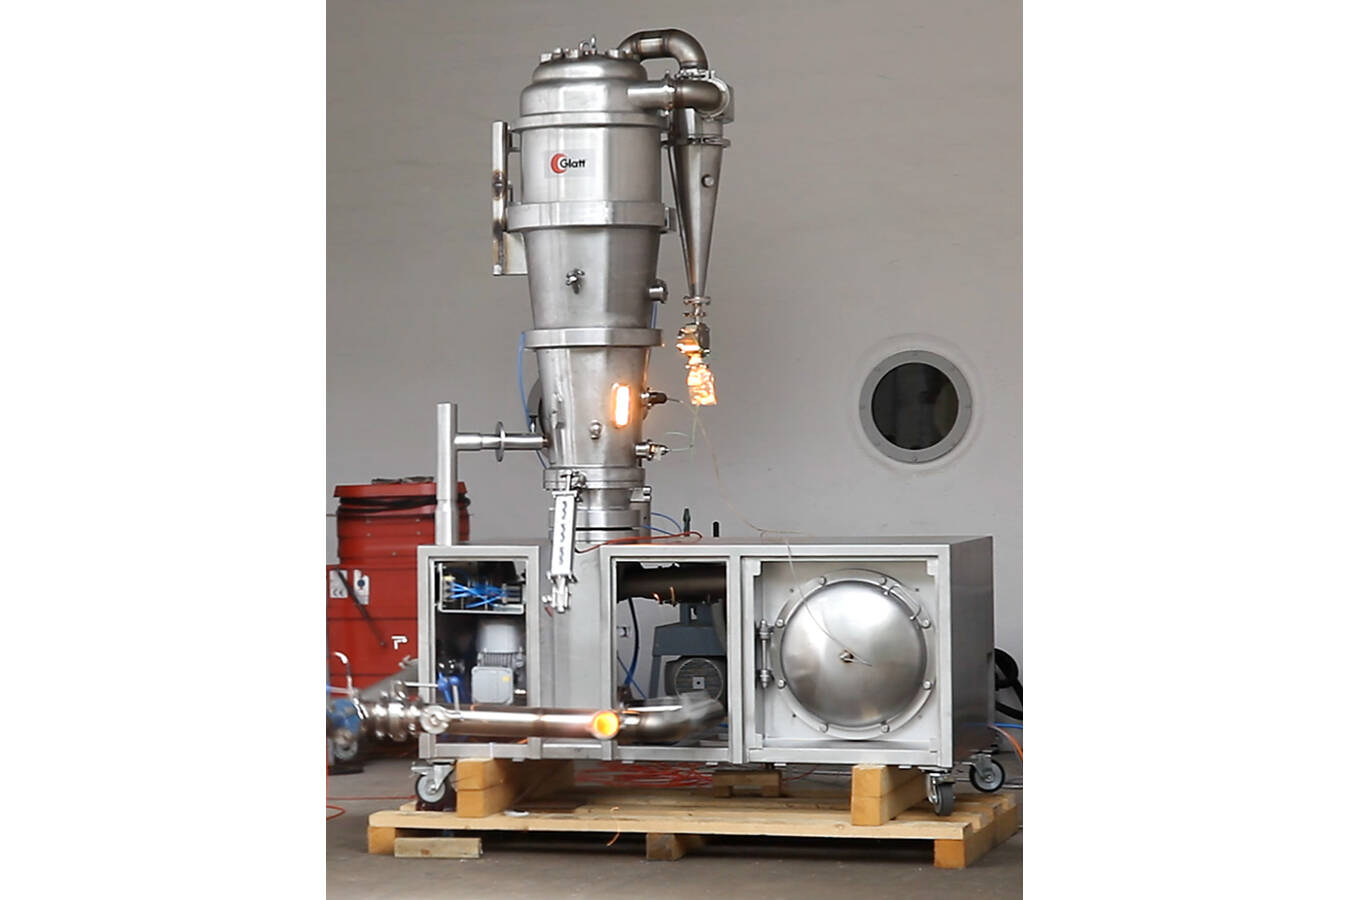 Preventive measures for explosion protection are not only developed and calculated, but also already tested on a laboratory scale (Copyright: Glatt)